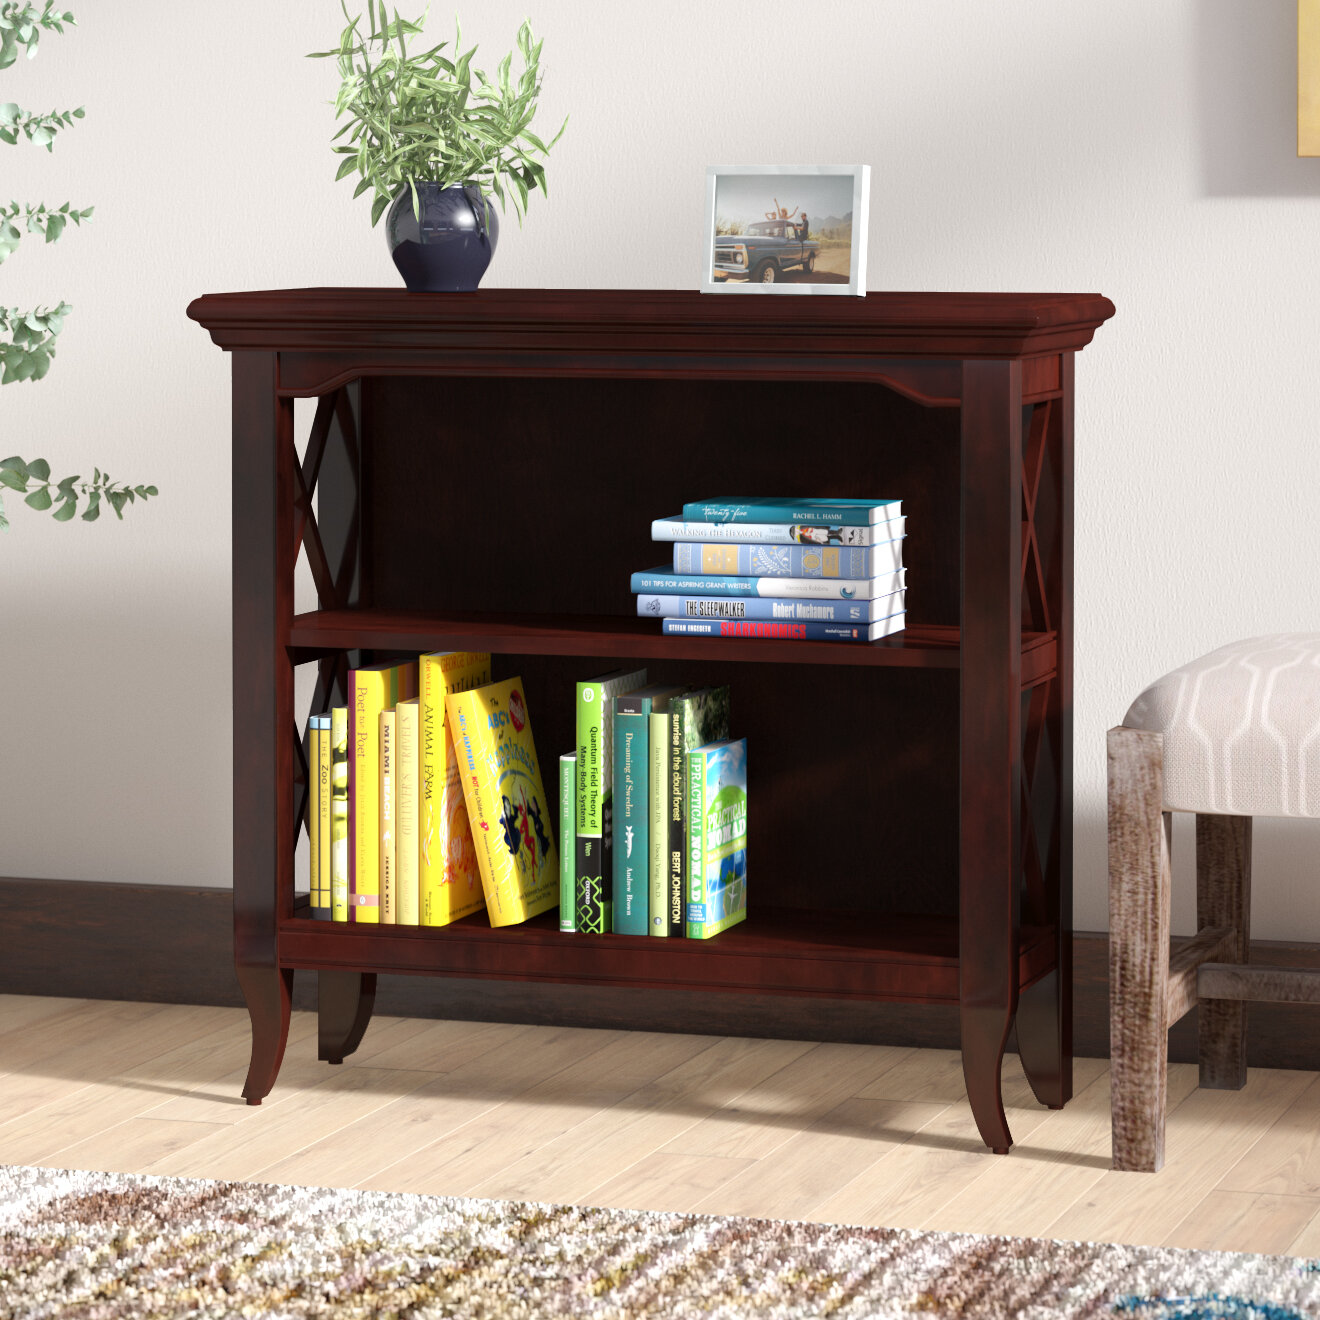 Darby Home Co Pennville Etagere Bookcase Reviews Wayfair